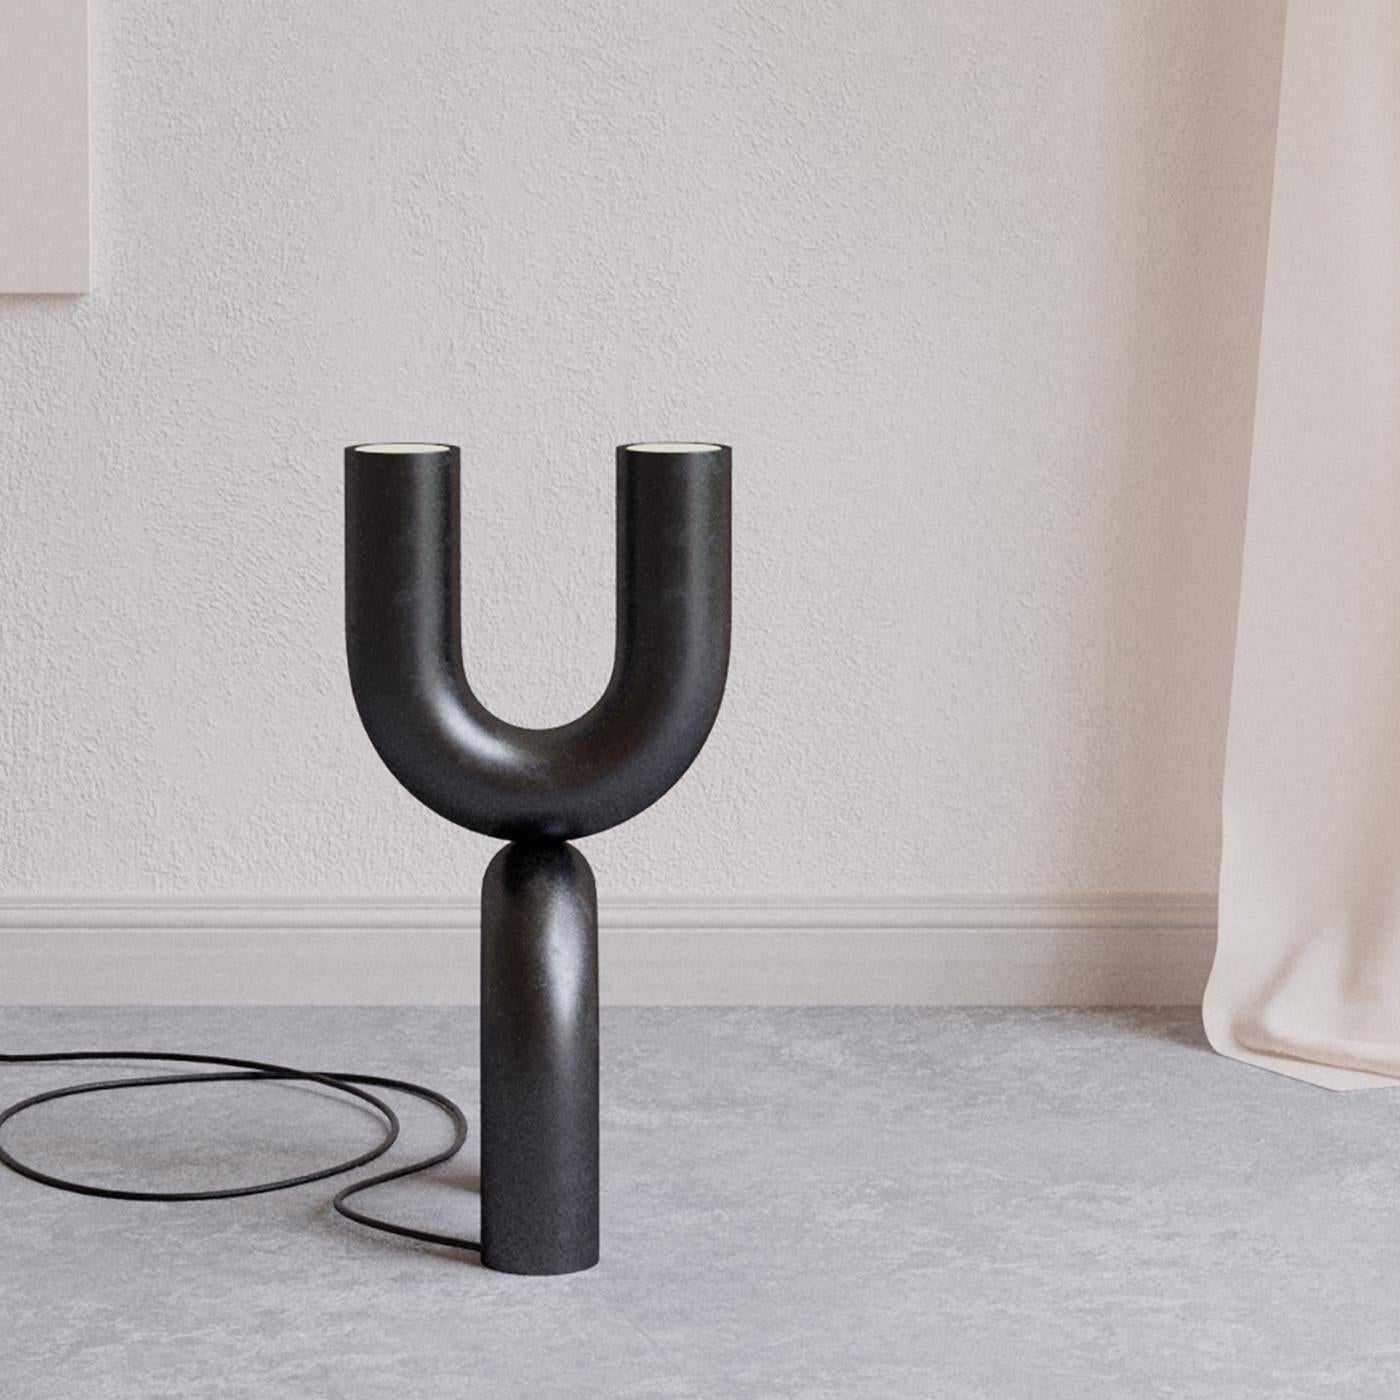 A totemic design obtained by piling two Us facing opposite directions, this stunning floor lamp will provide illumination while adding an exquisite artistic twist to corners of contemporary homes. The steel frame features a homogeneous black finish